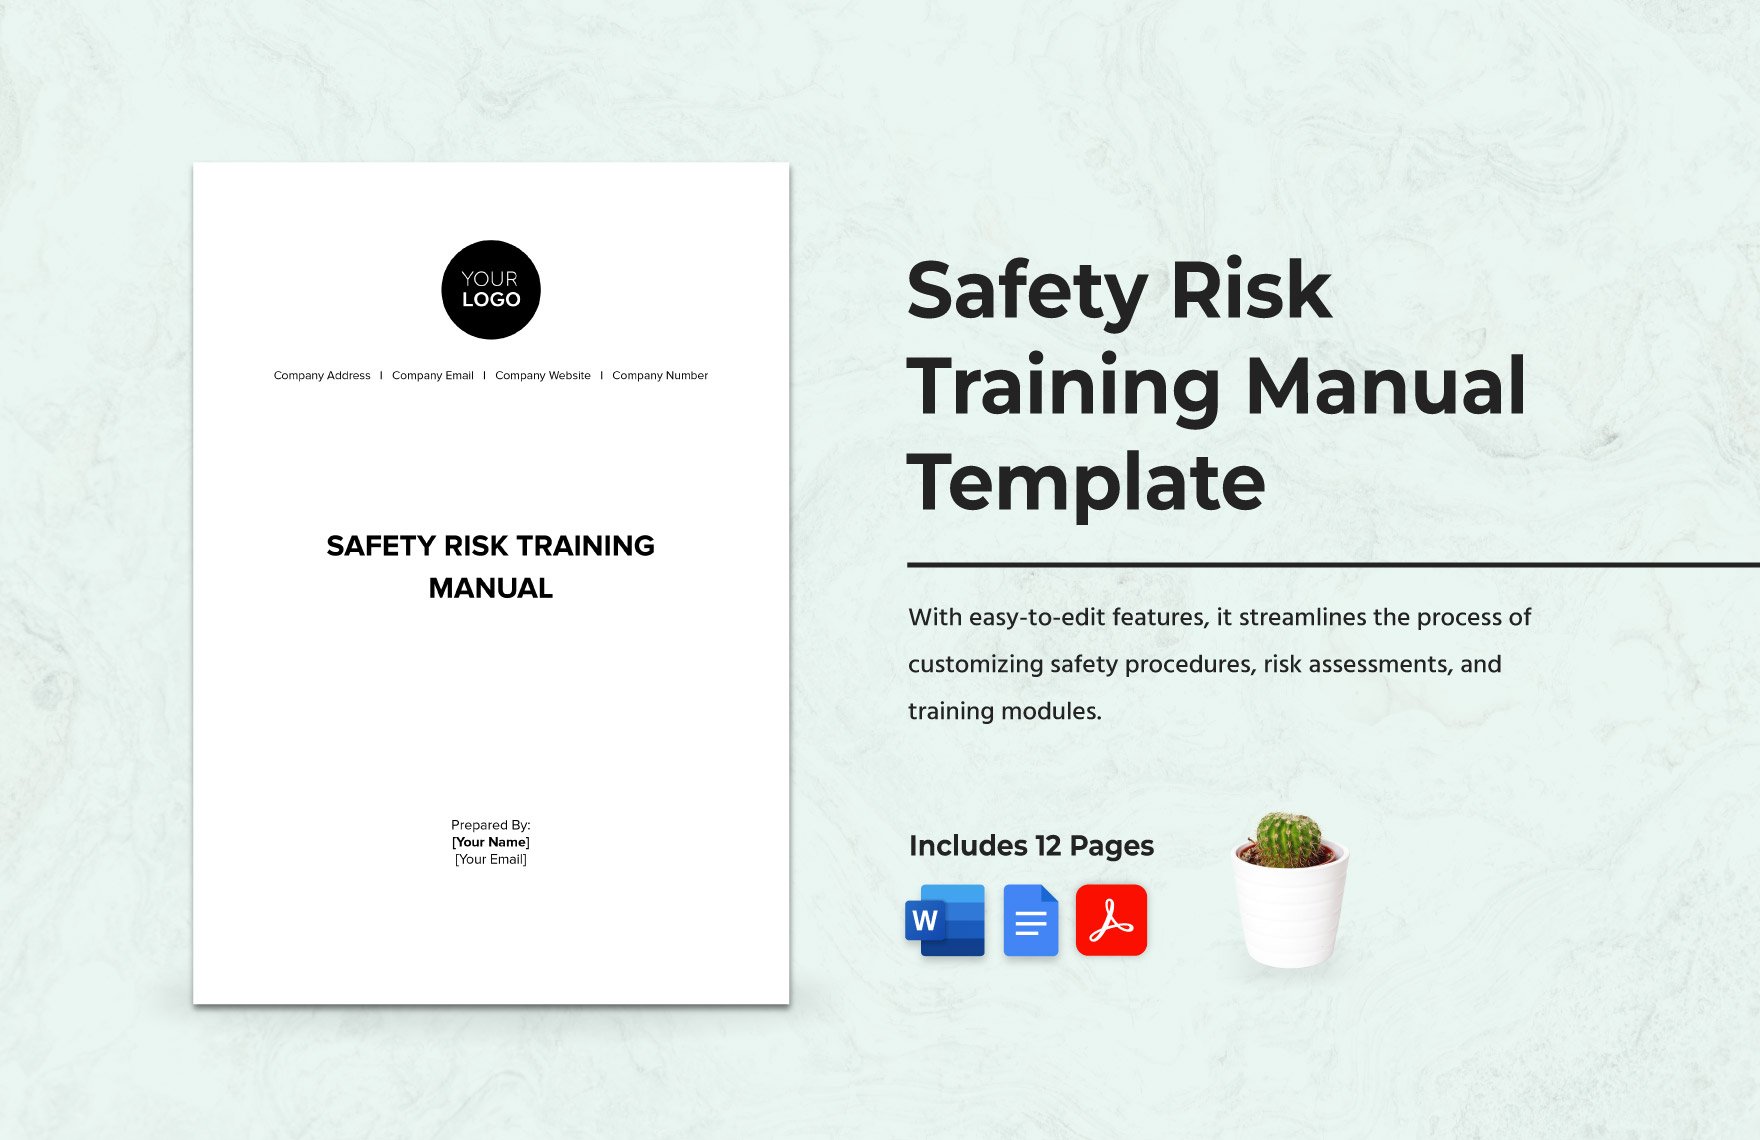 Safety Risk Training Manual Template in Word, Google Docs, PDF